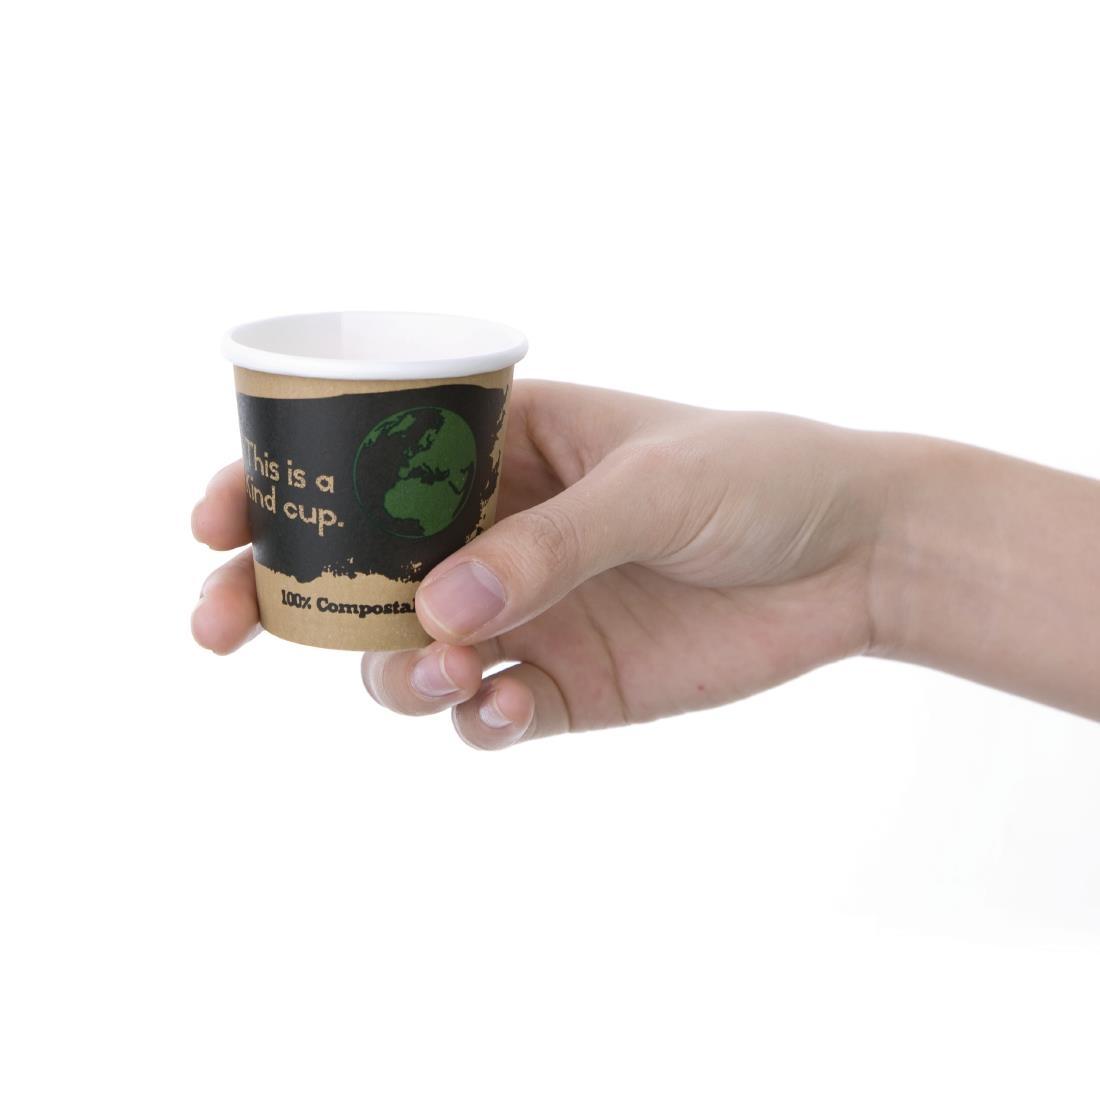 Fiesta Compostable Espresso Cups Single Wall 113ml / 4oz (Pack of 1000) - DY981  - 3